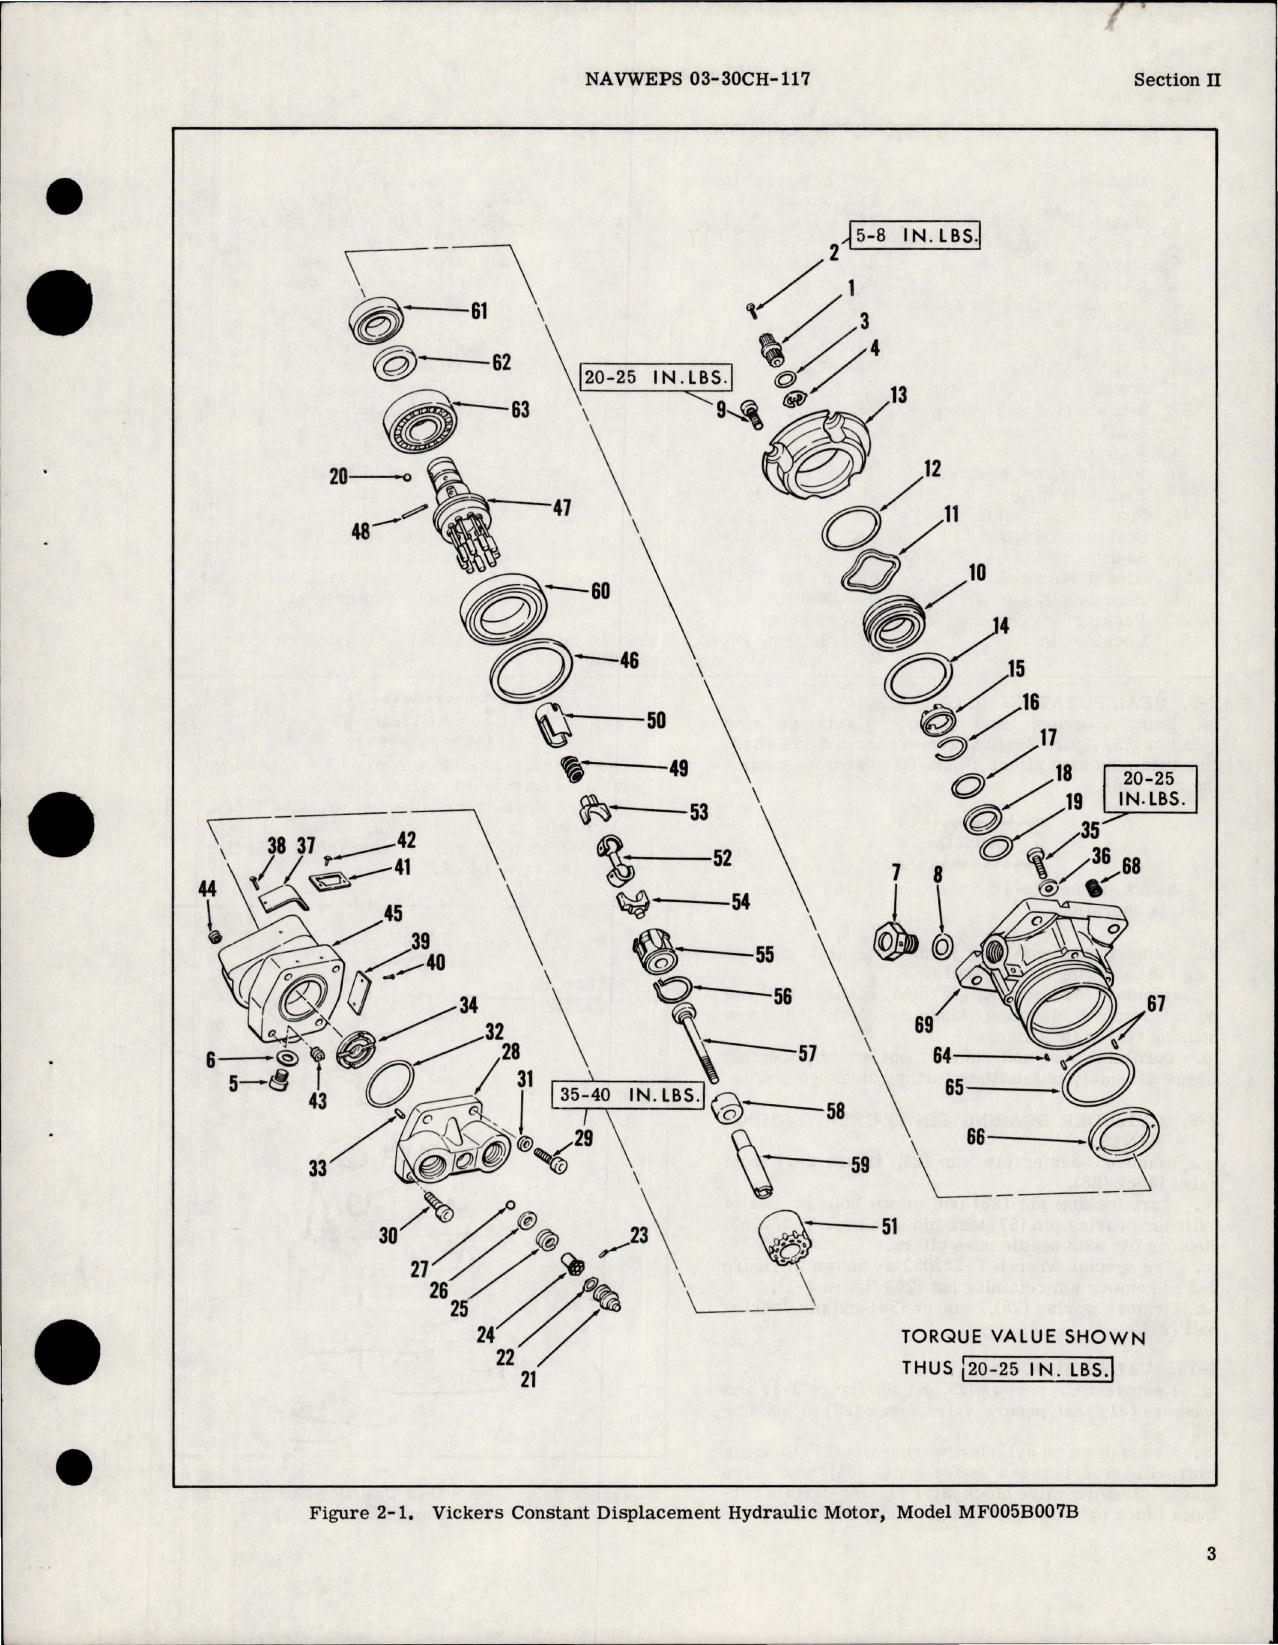 Sample page 7 from AirCorps Library document: Overhaul Instructions for Constant Displacement Hydraulic Motor - Model MF005B007B 